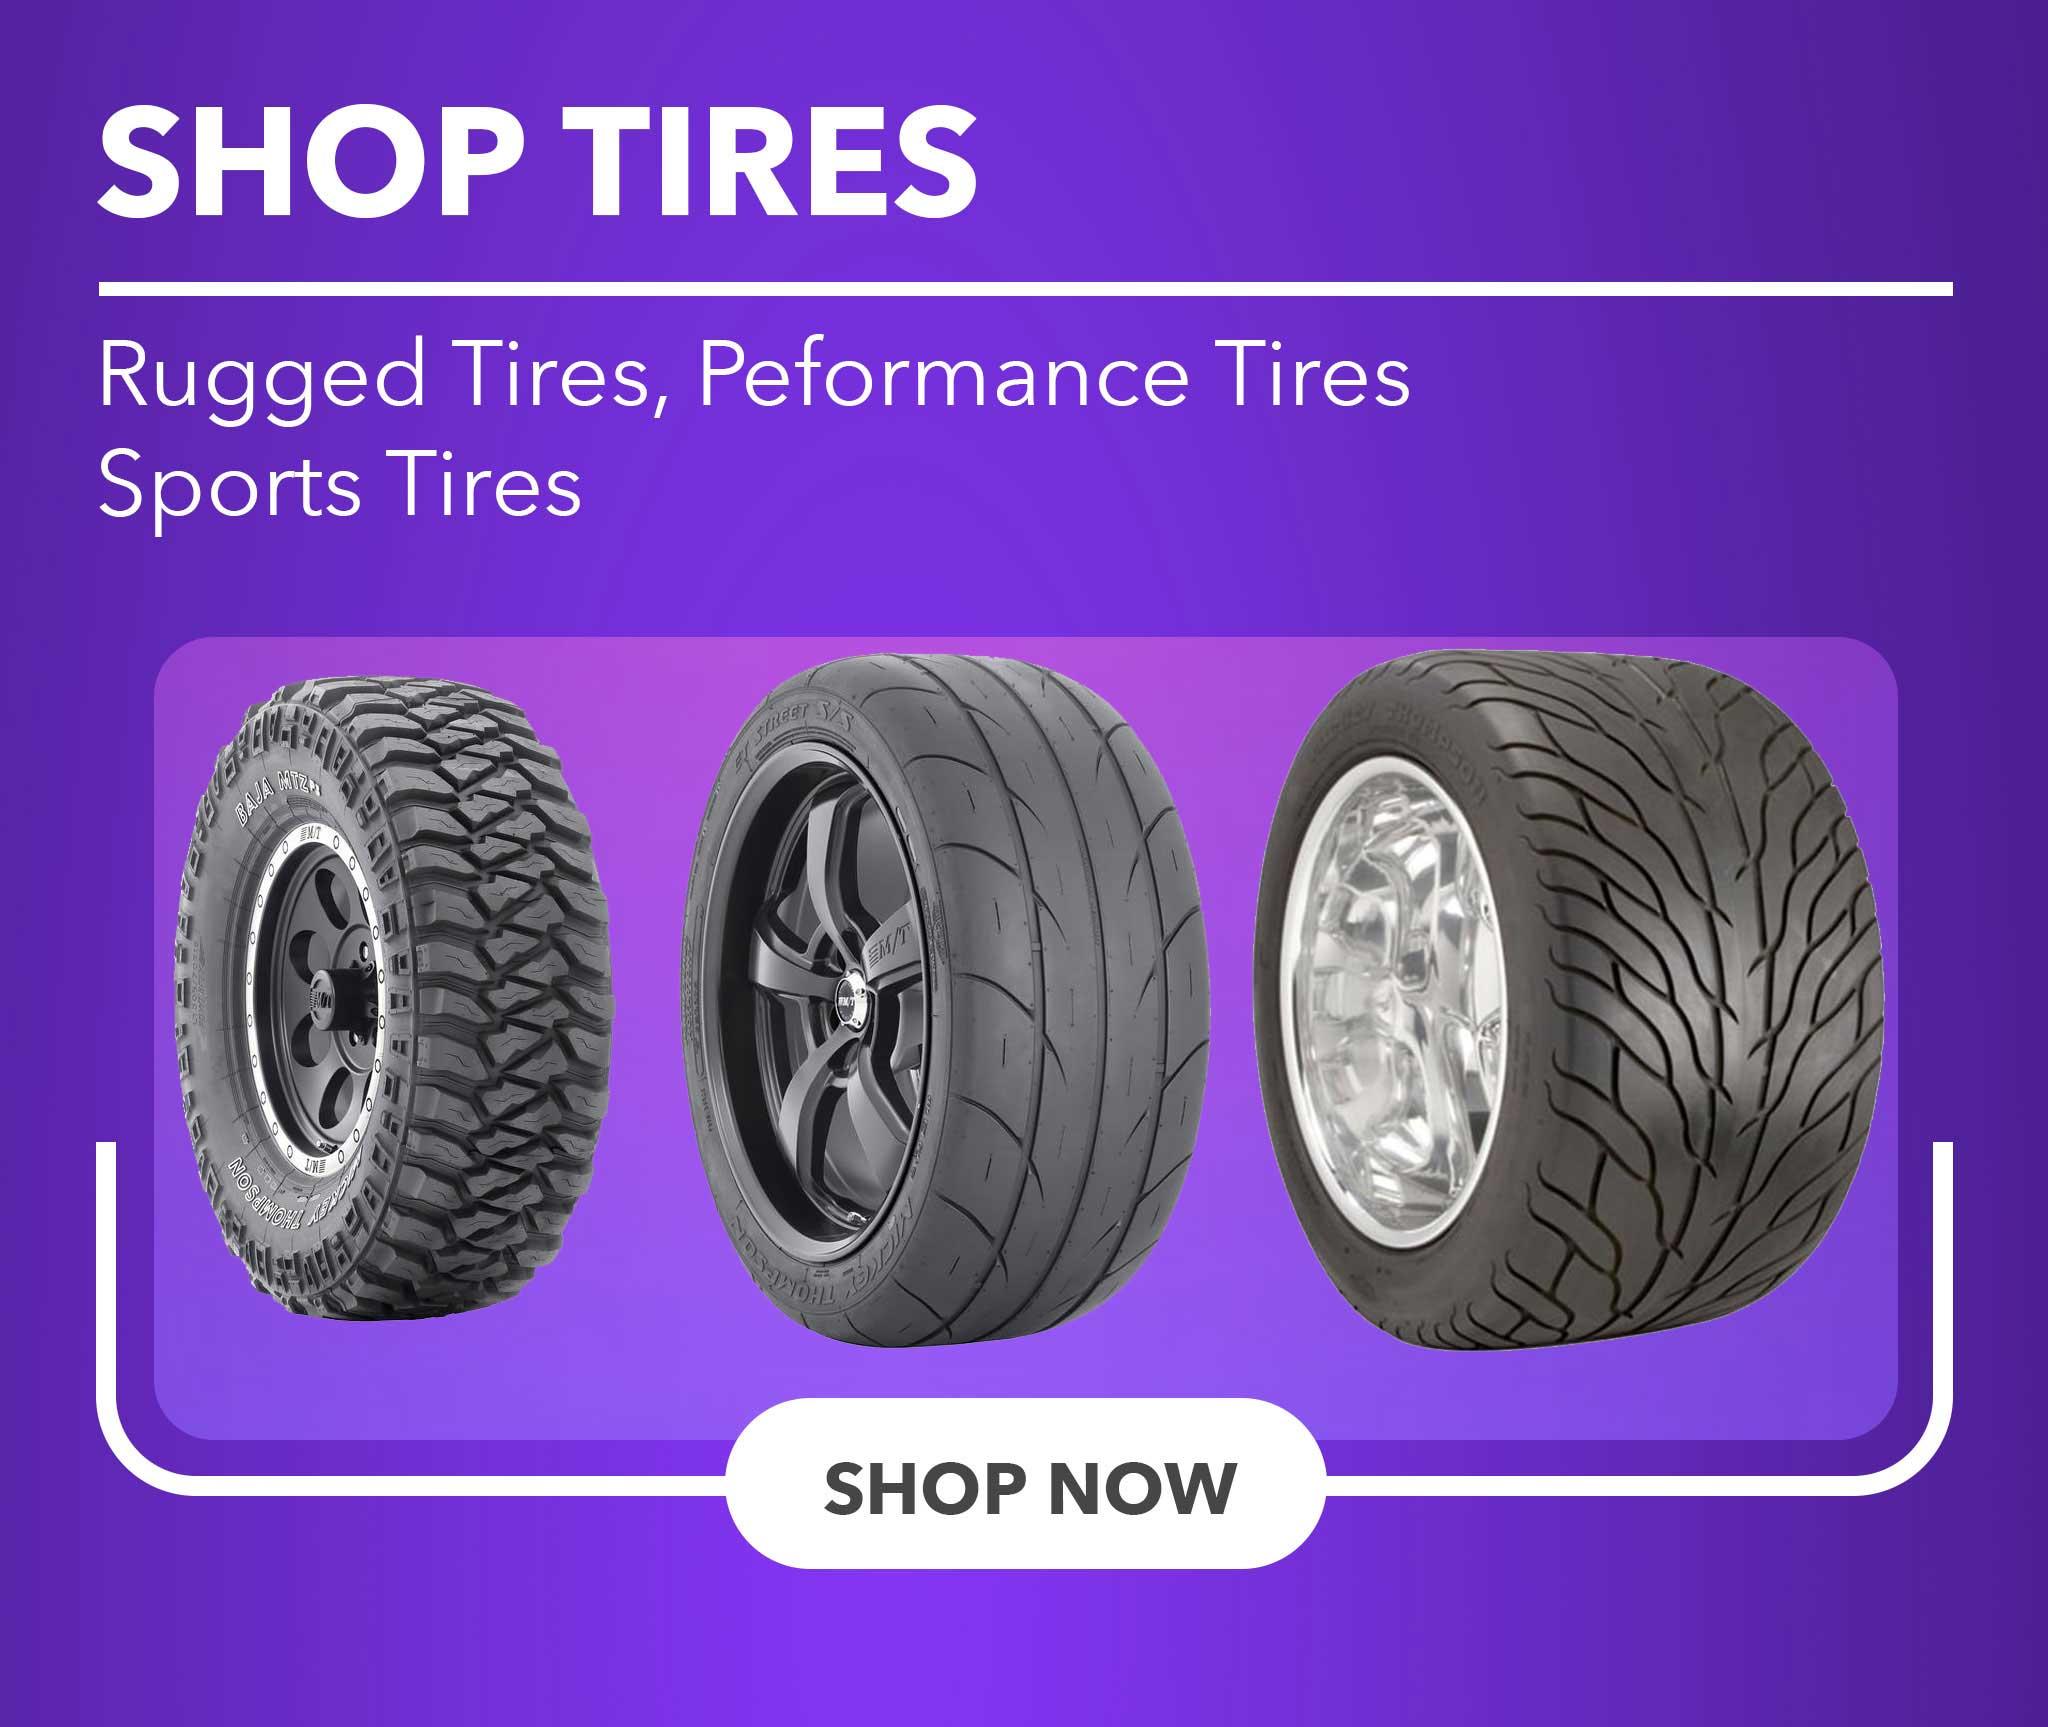 Rugged Tires, Performance Tires, Sports tires